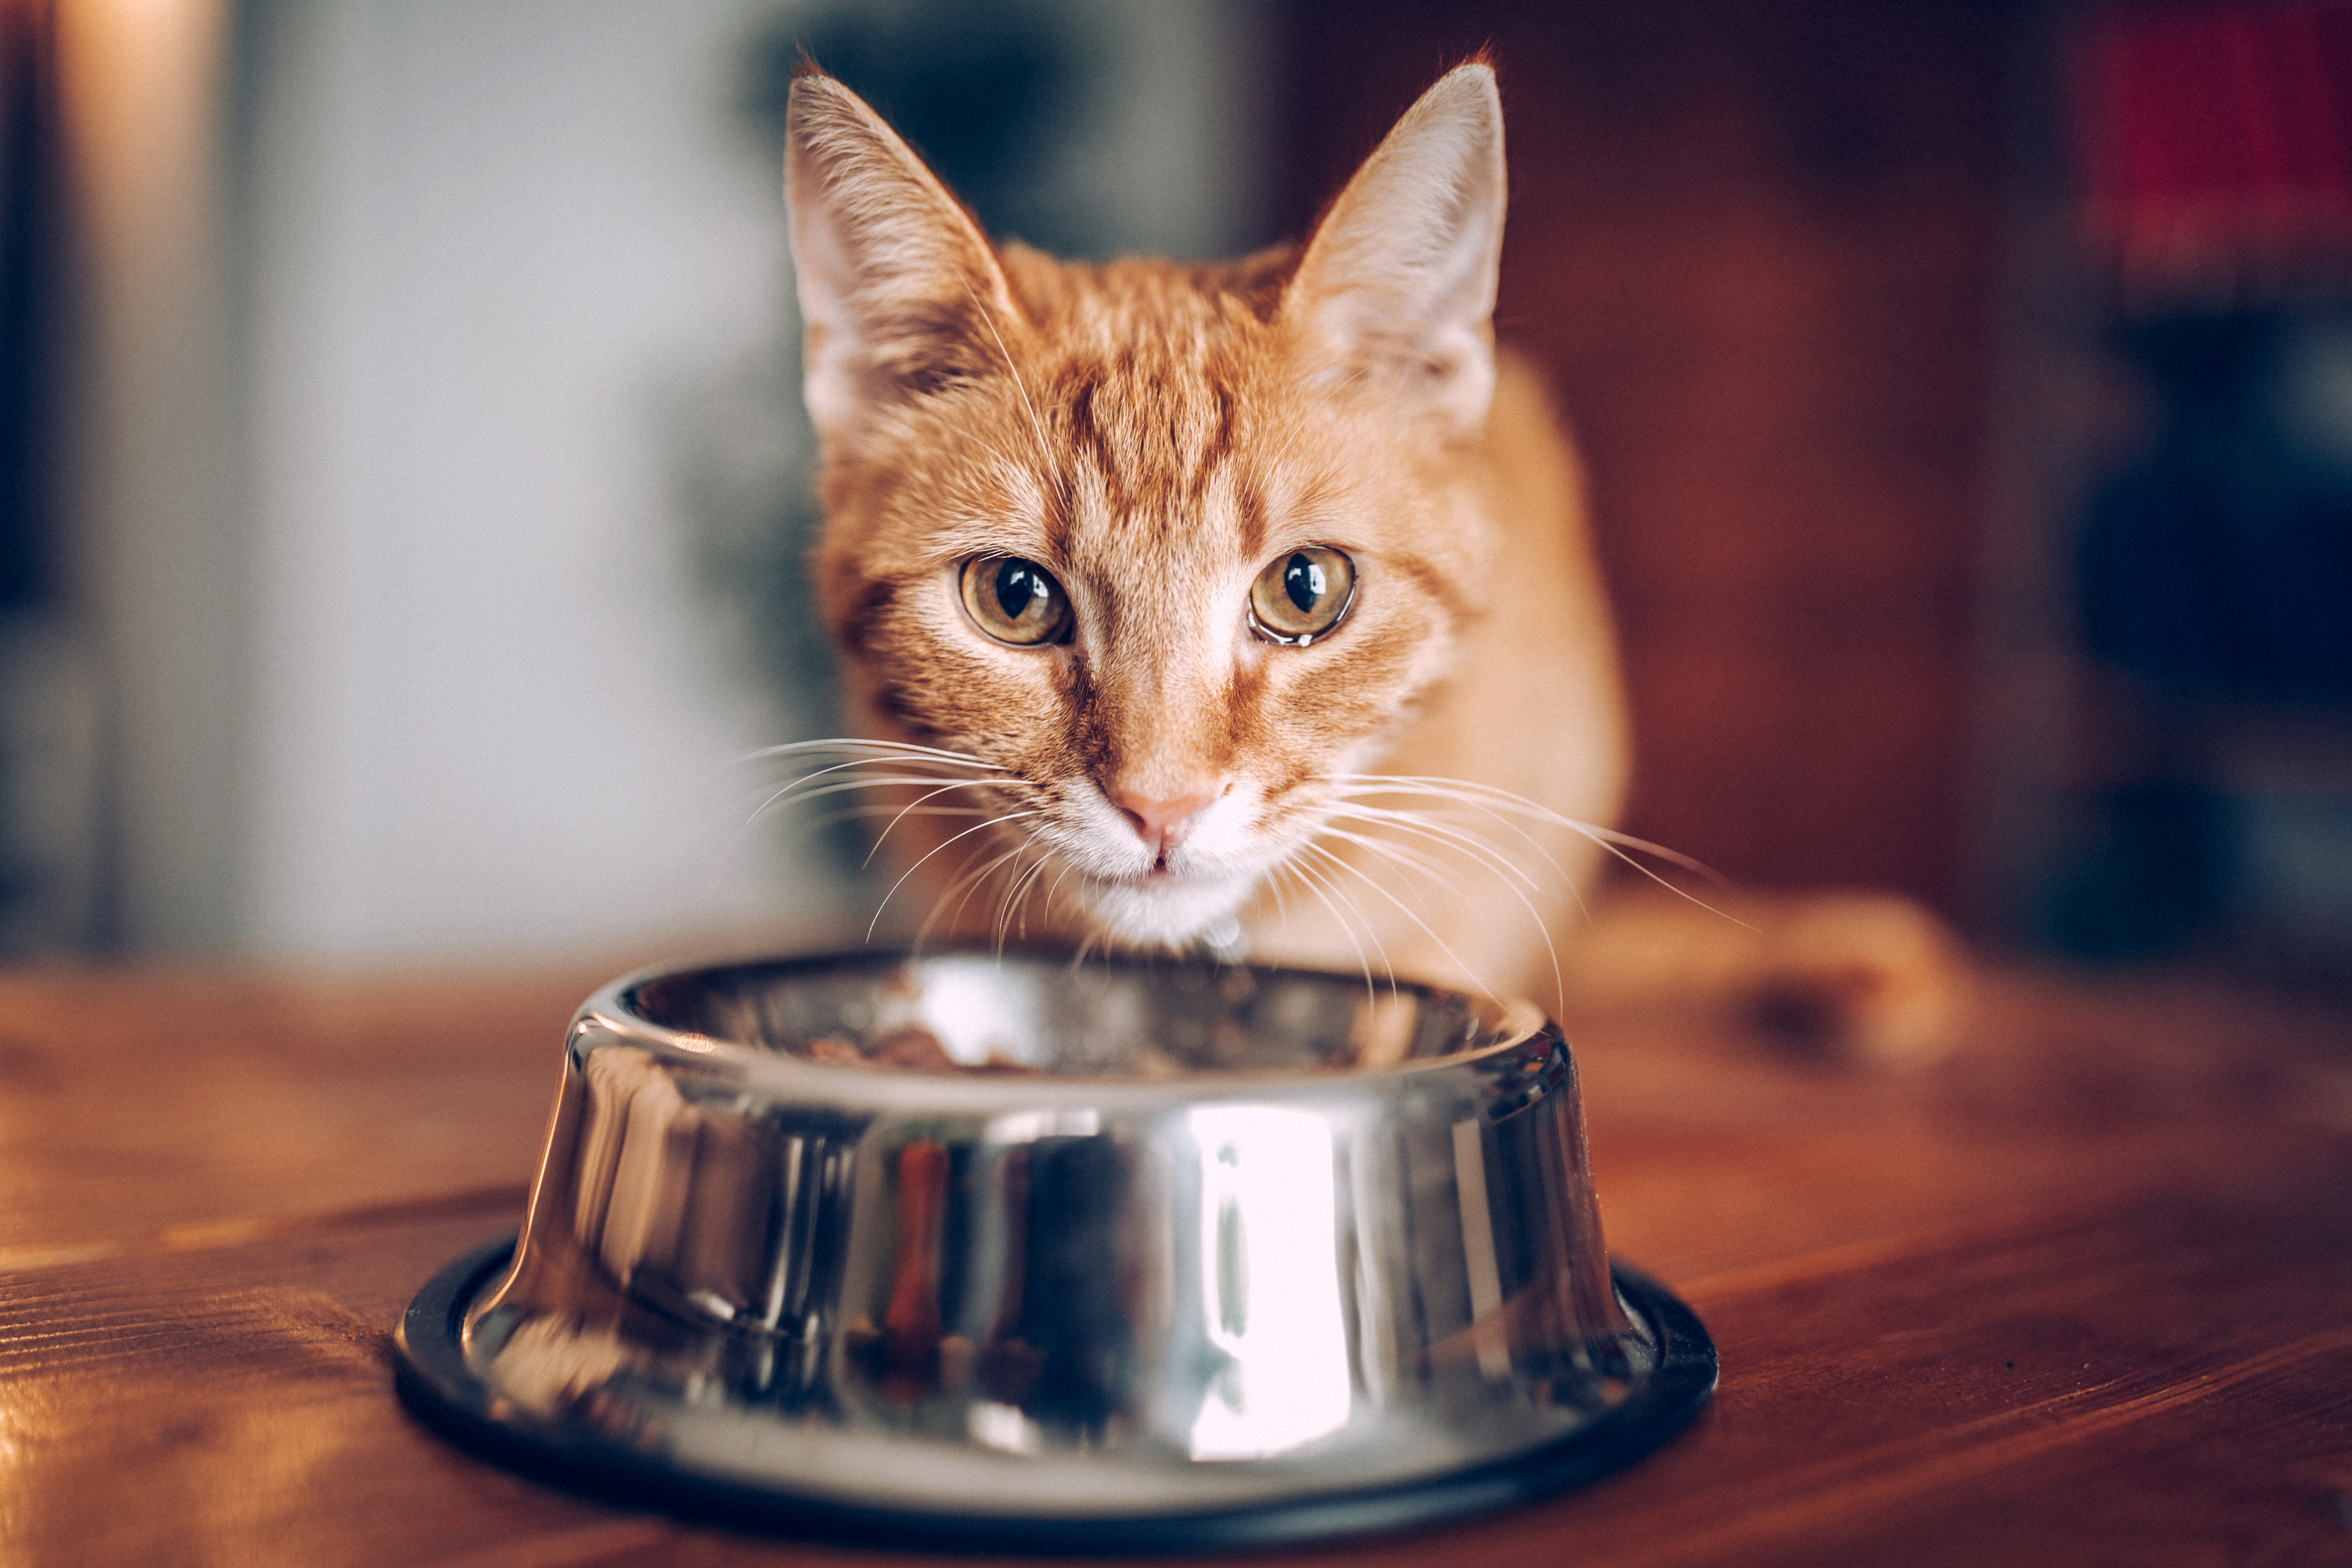 Celebrate National Homemade Soup Day with Your Cat